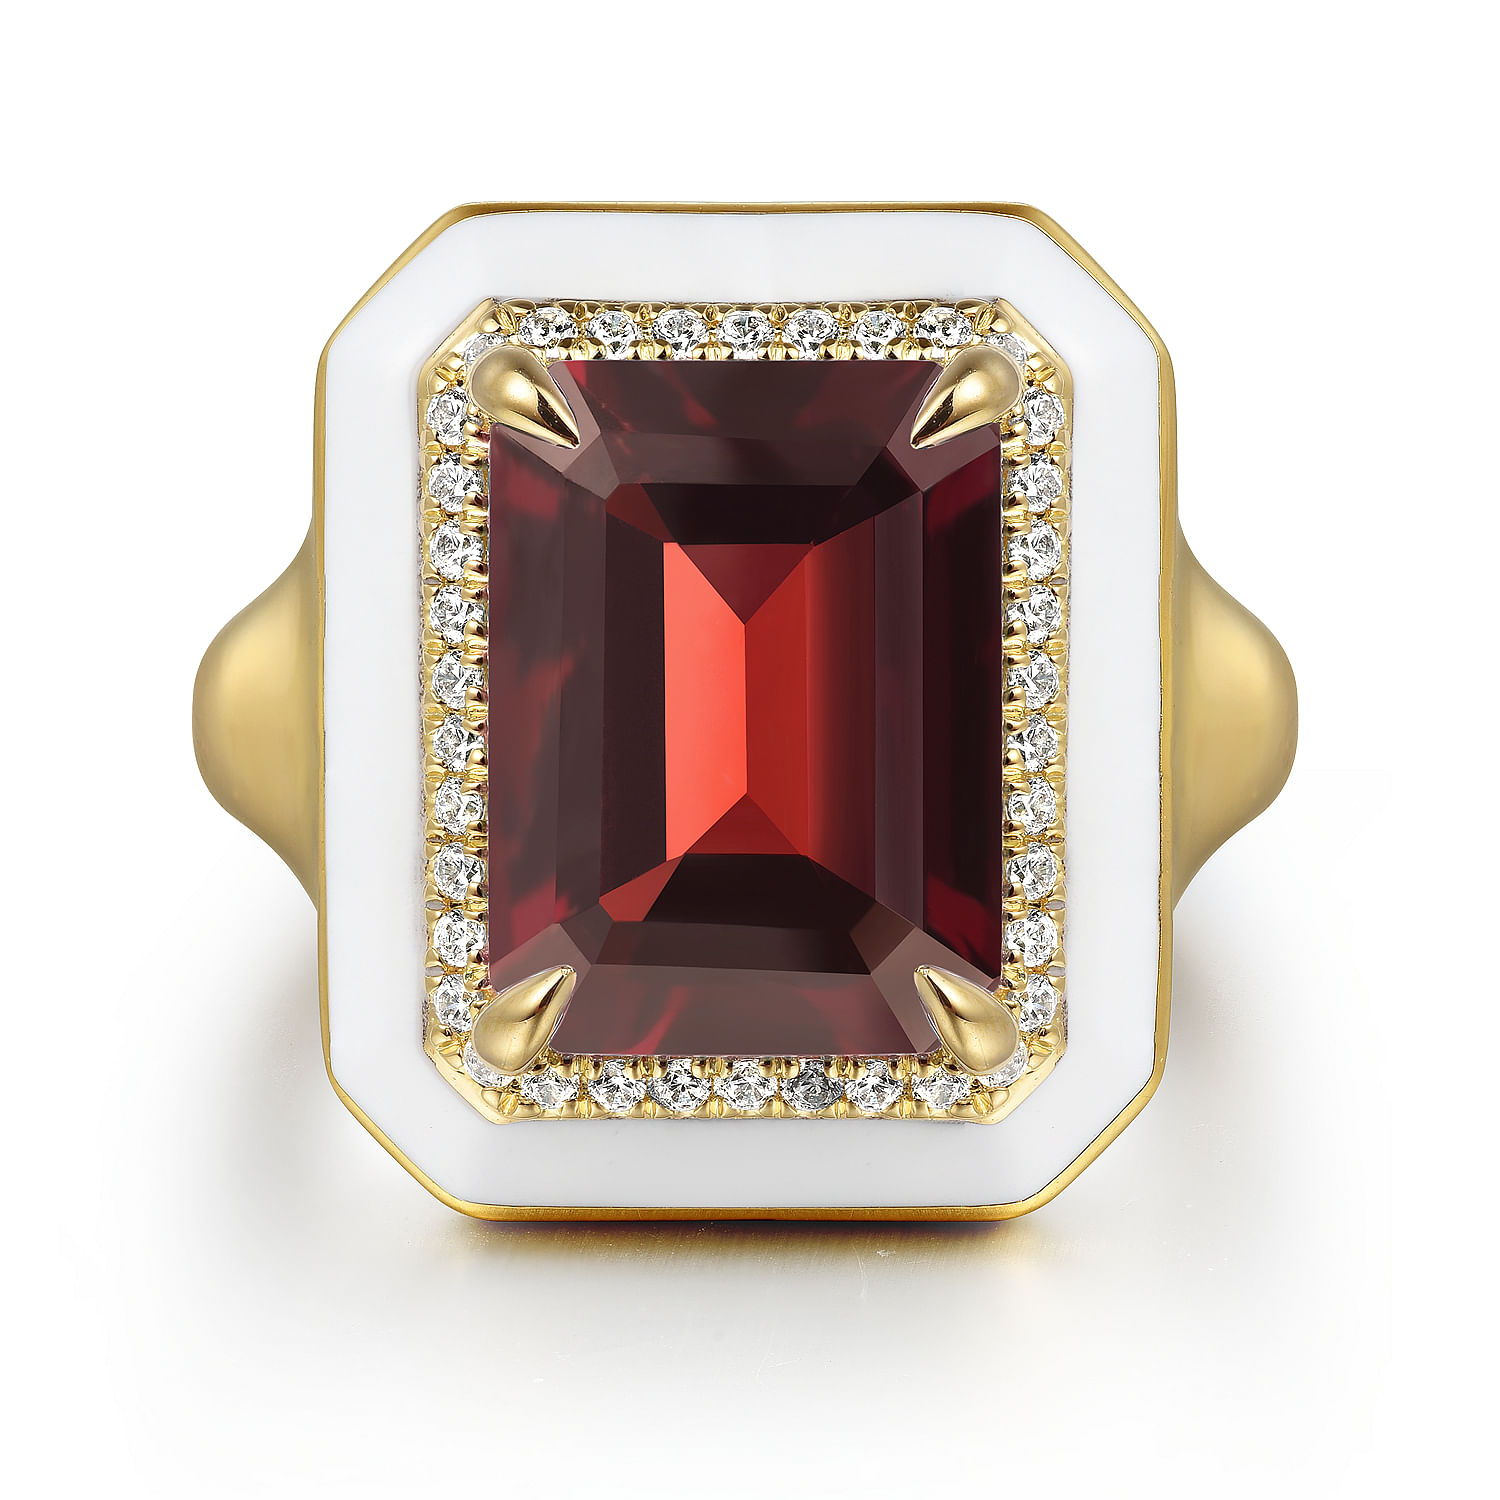 14K Yellow Gold Diamond and Garnet Emerald Cut Ladies Ring With Flower Pattern J-Back and White Enamel